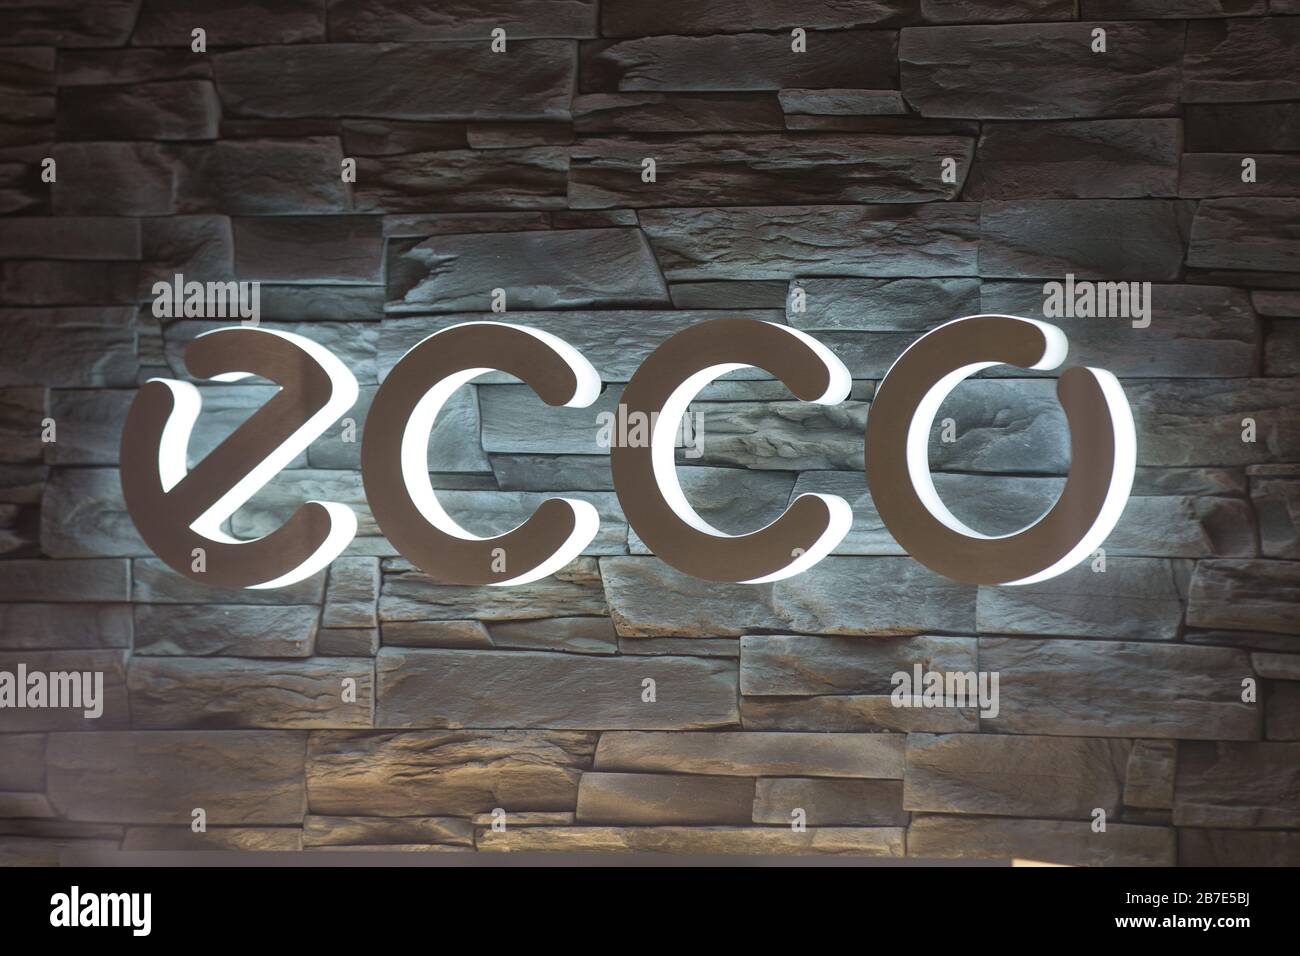 Warsaw, Poland. 27th Feb, 2020. ECCO logo seen at one of their stores.  Credit: Karol Serewis/SOPA Images/ZUMA Wire/Alamy Live News Stock Photo -  Alamy